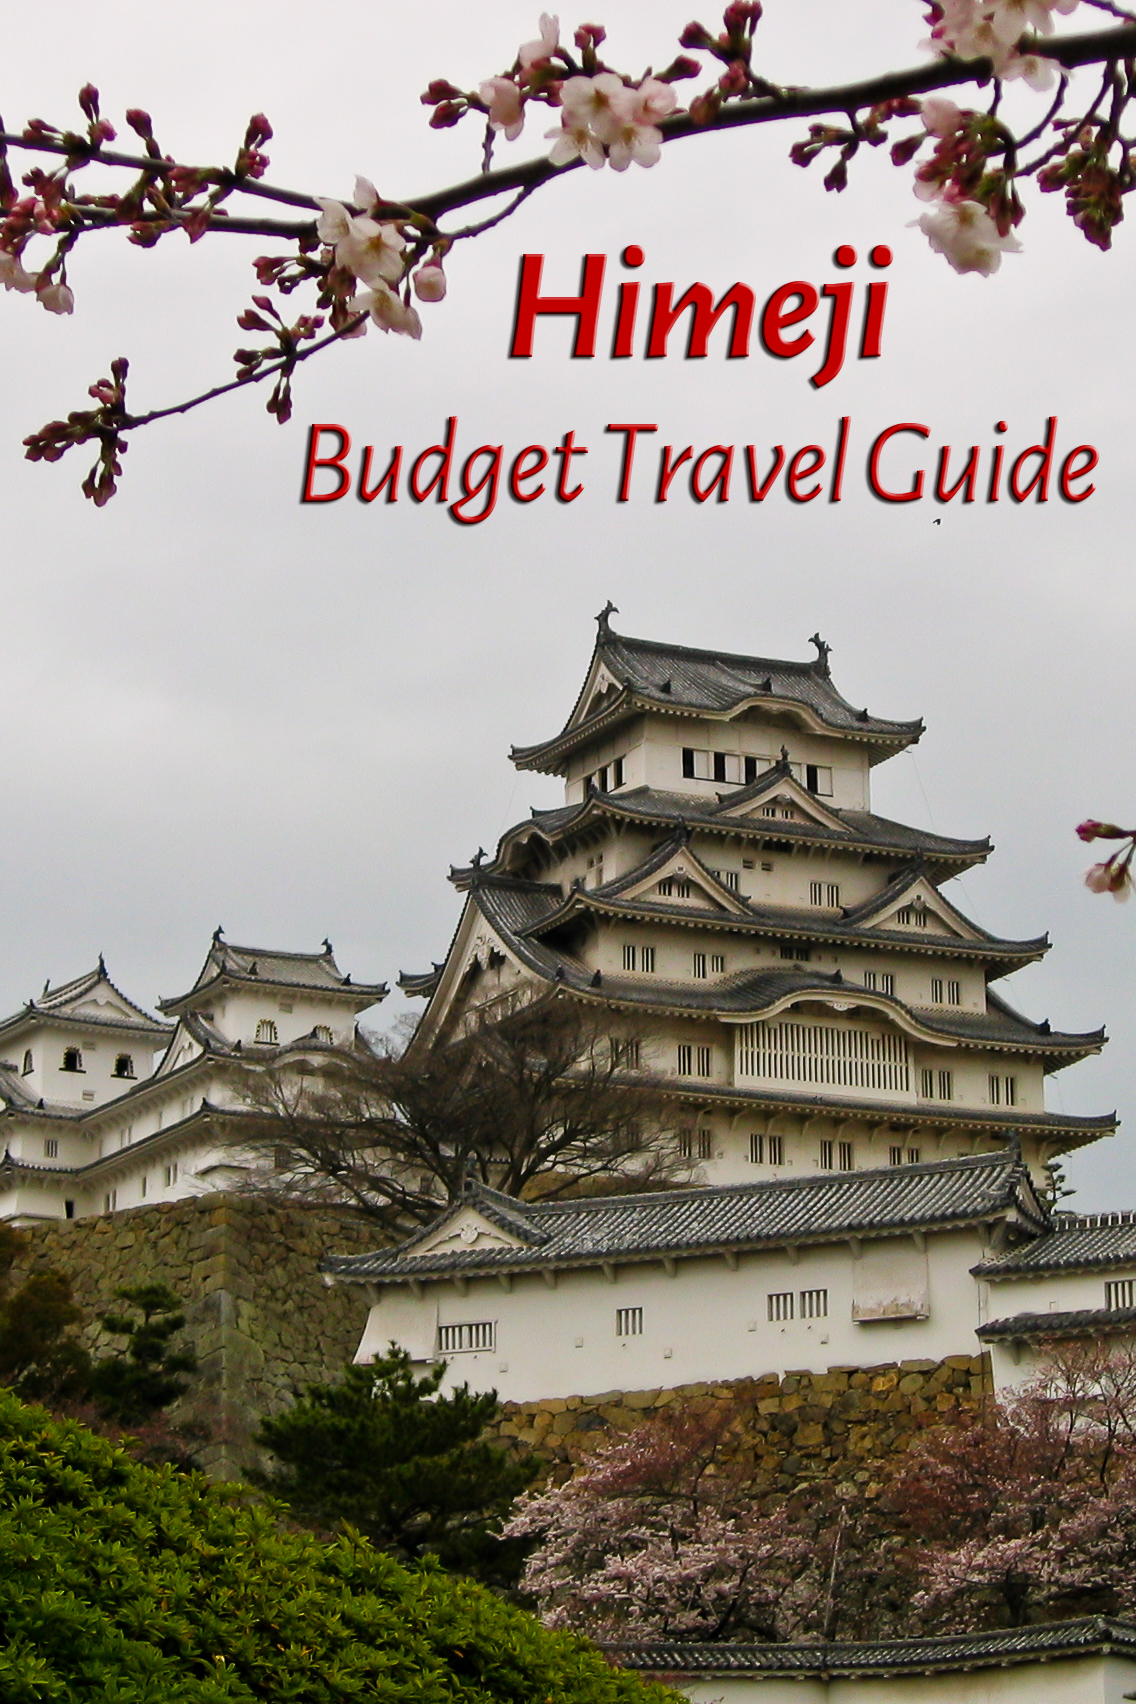 Budget travel guide for Himeji in Japan